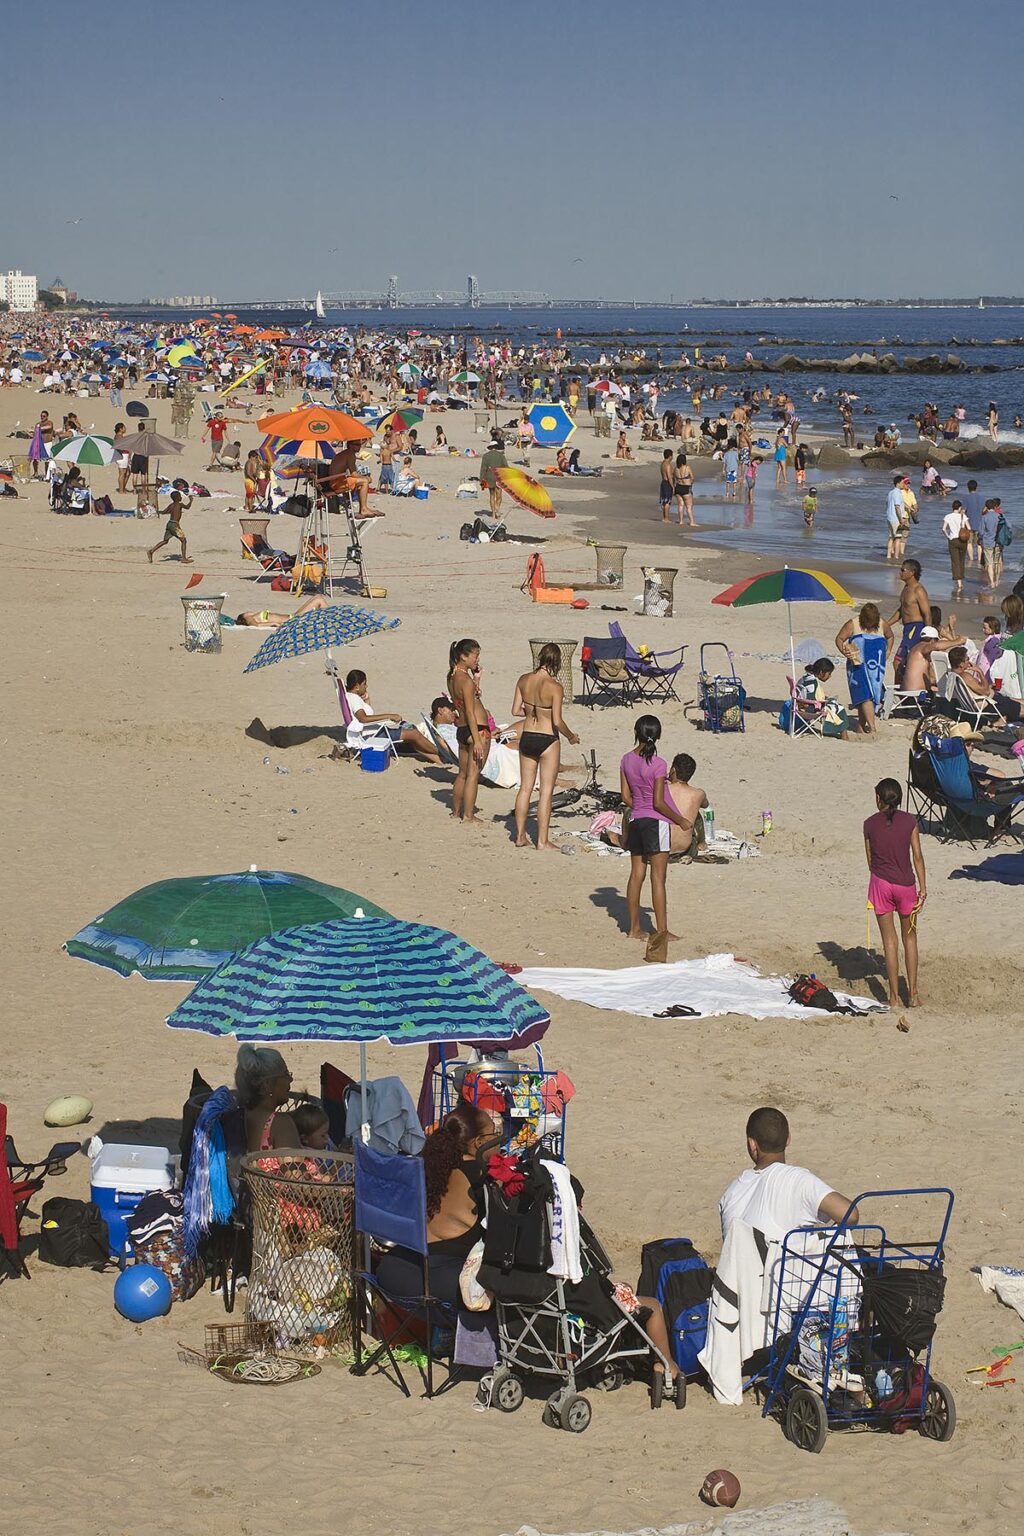 A crowded day on the beach at CONEY ISLAND - NEW YORK CITY